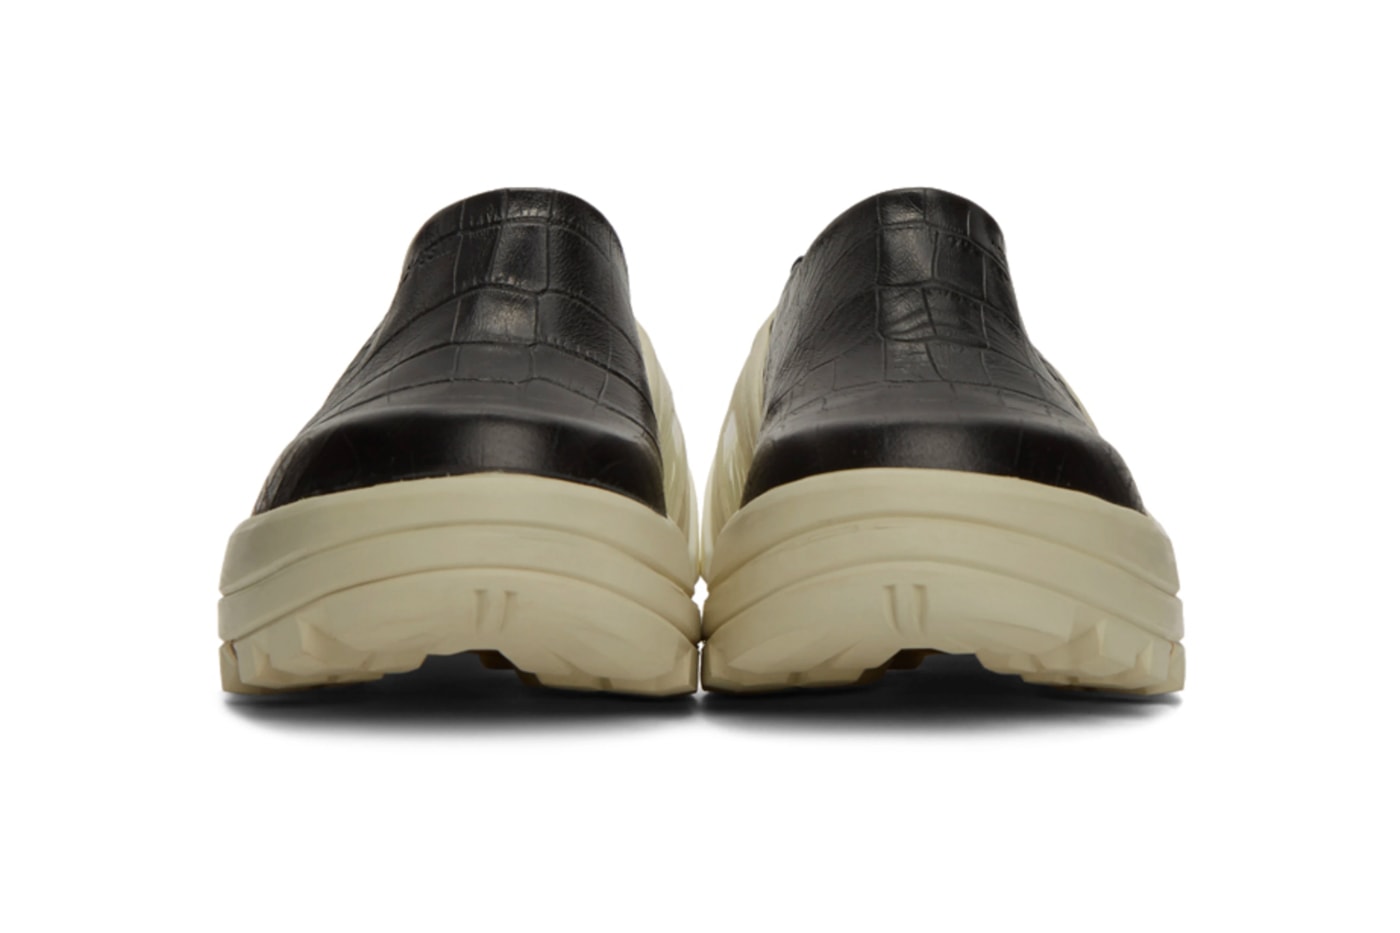 1017 ALYX 9SM Black Croc Leather Clog patent skin spring summer 2020 collection matthew M williams designers made in italy shoes sneakers footwear kicks trainers runners slippers 